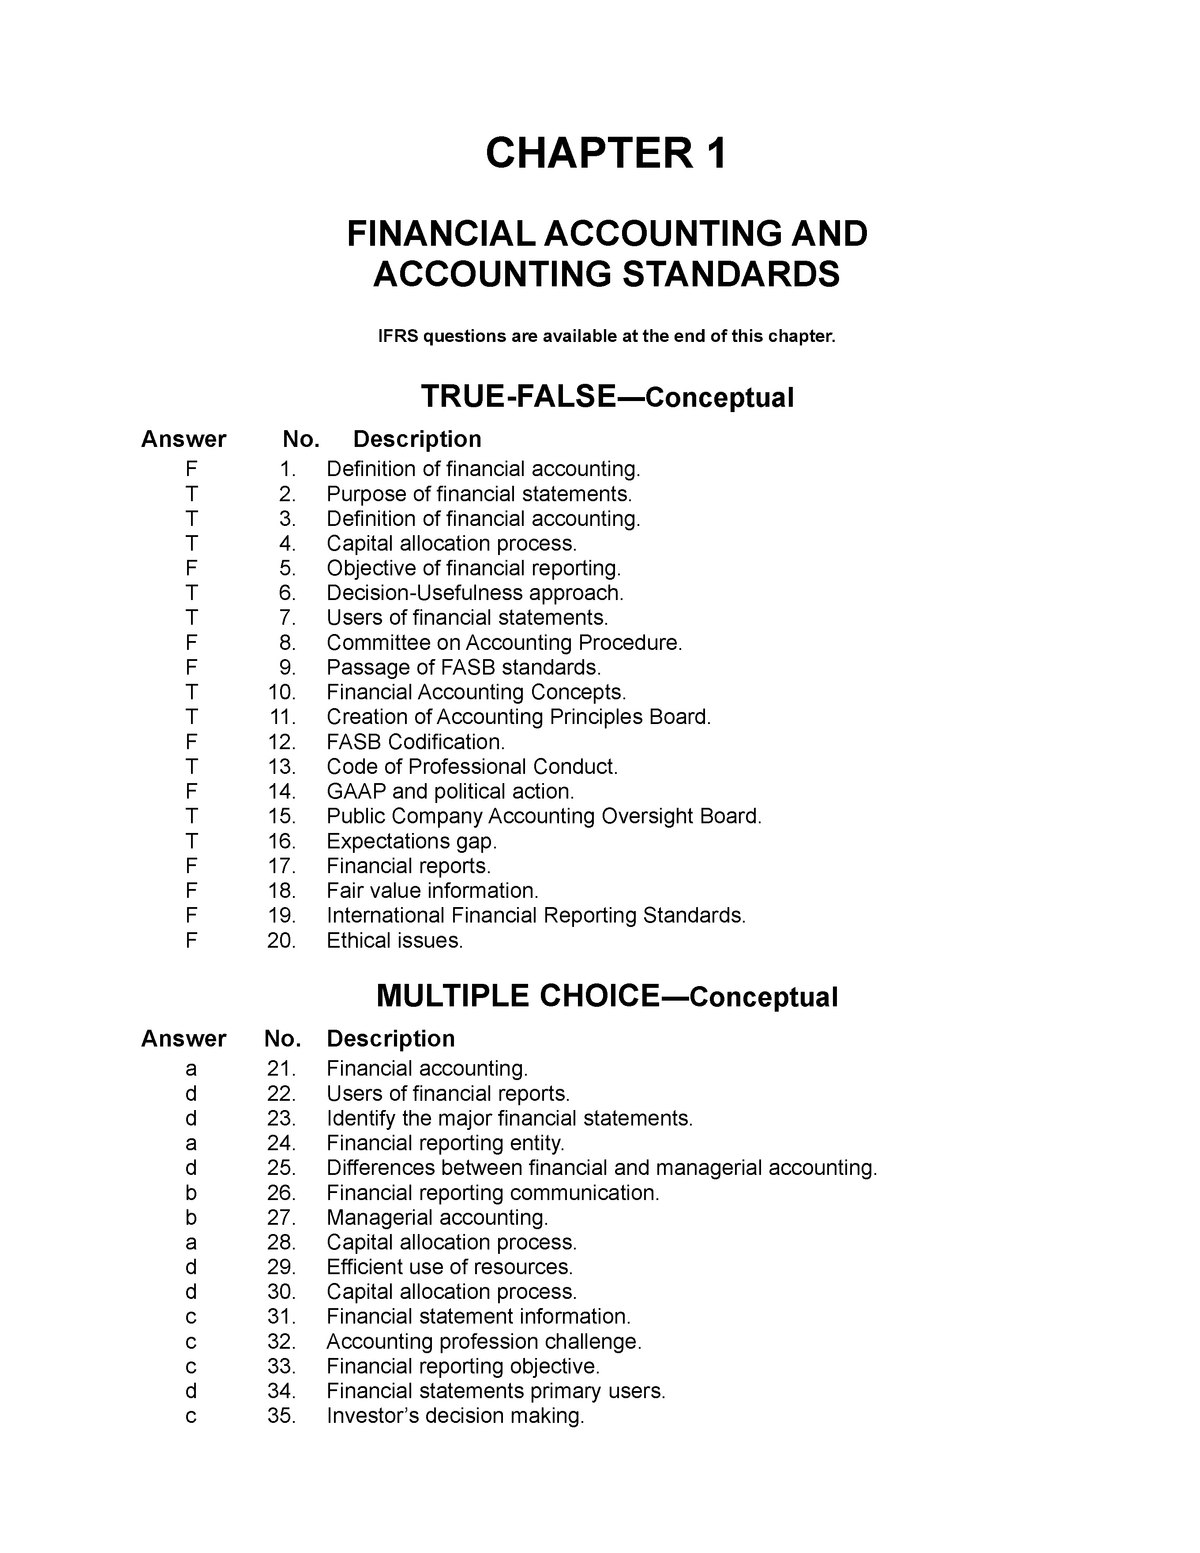 practical-intermediate-accounting-chapter-1-testbank-chapter-financial-accounting-and